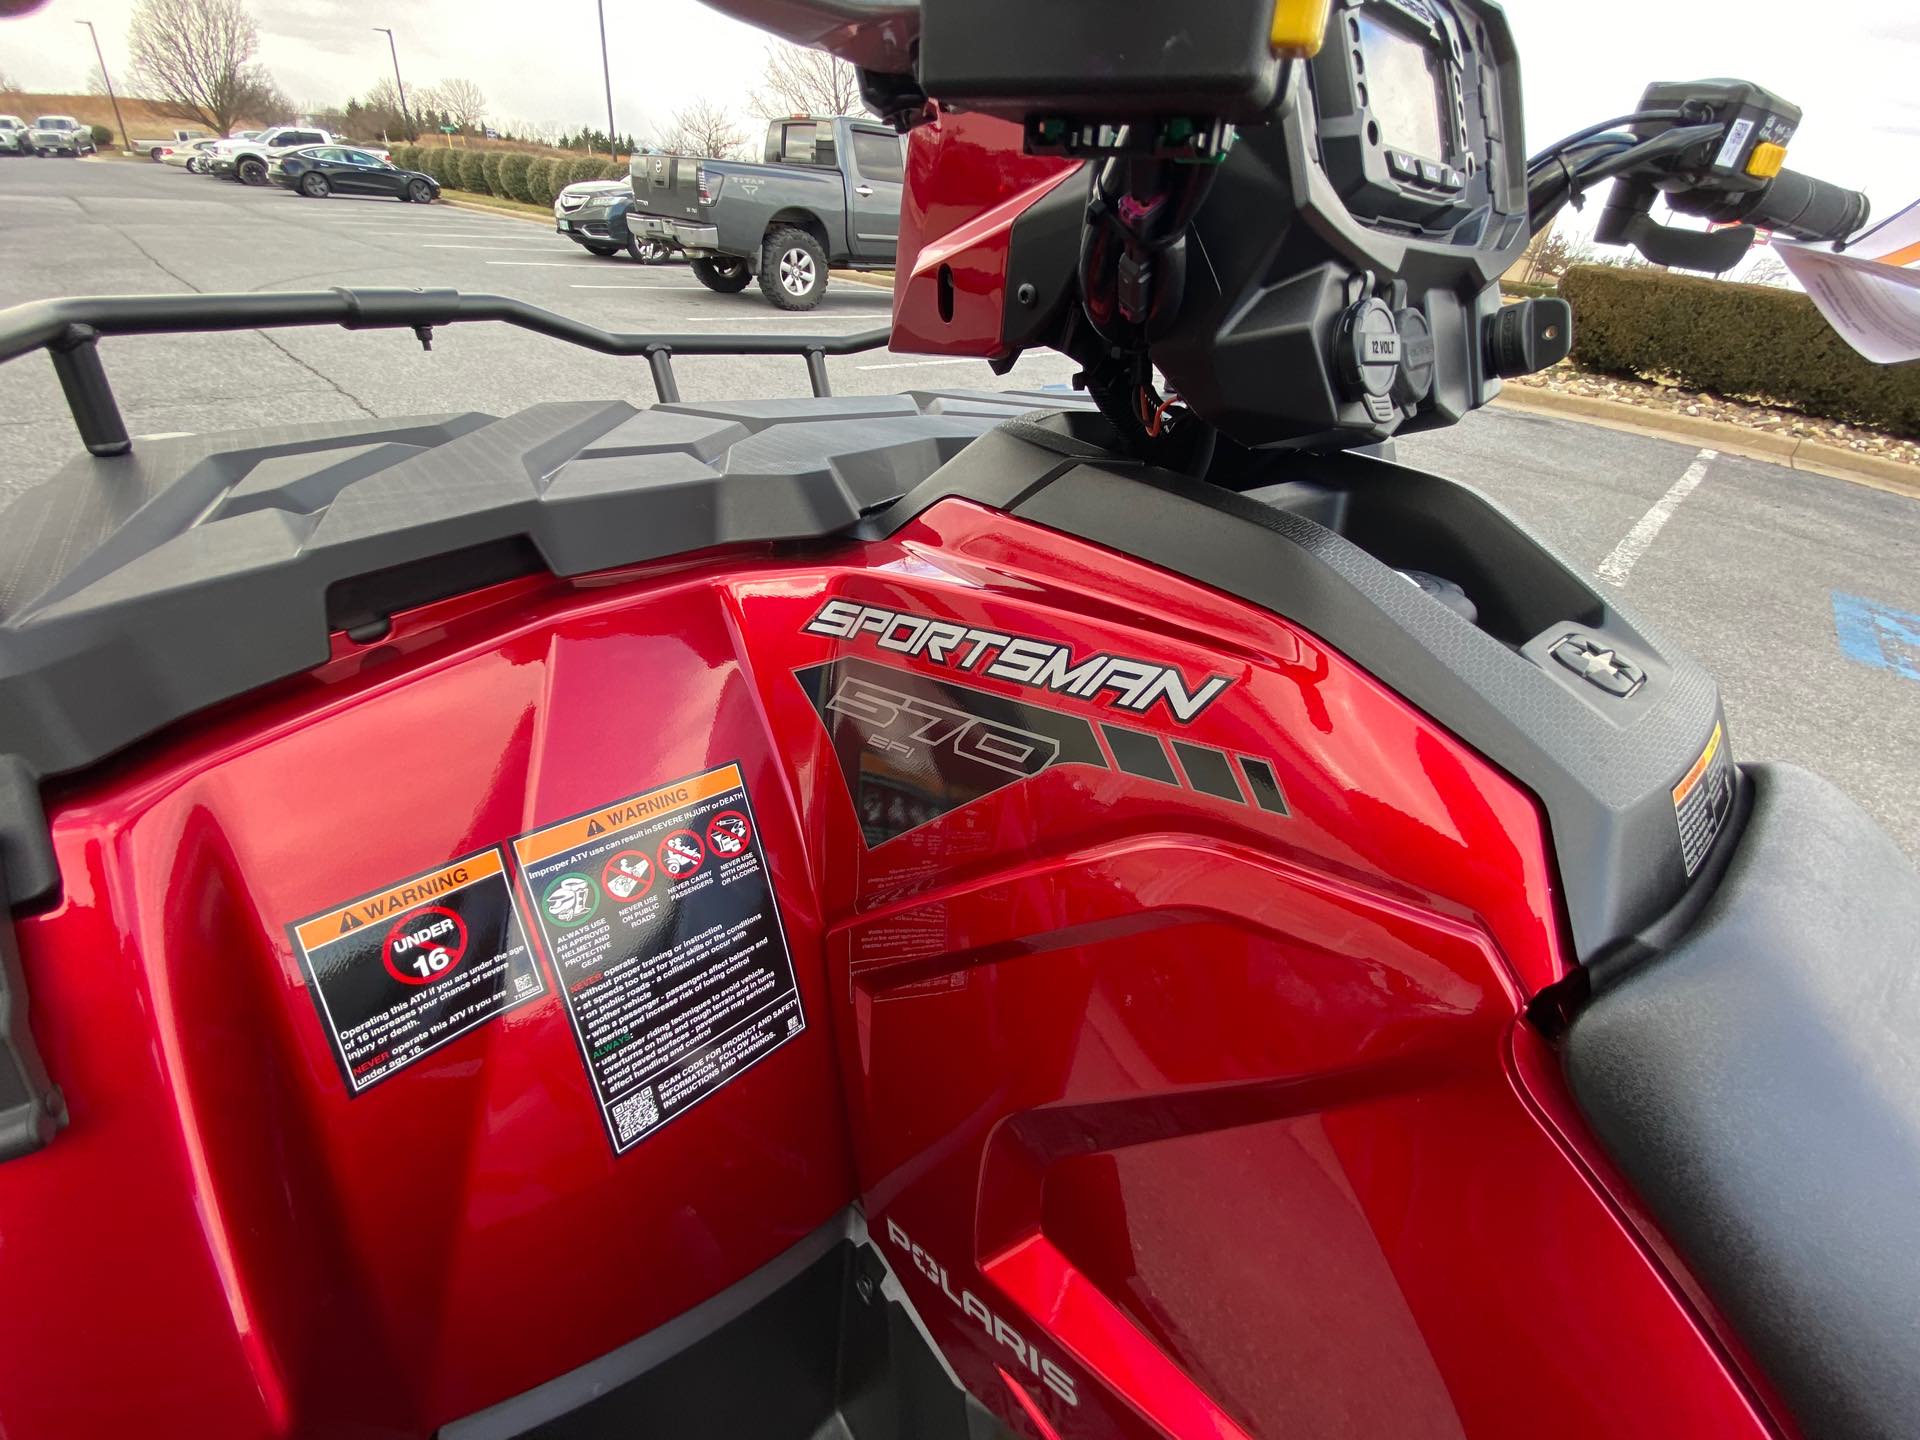 2023 Polaris Sportsman 570 Trail at Valley Cycle Center